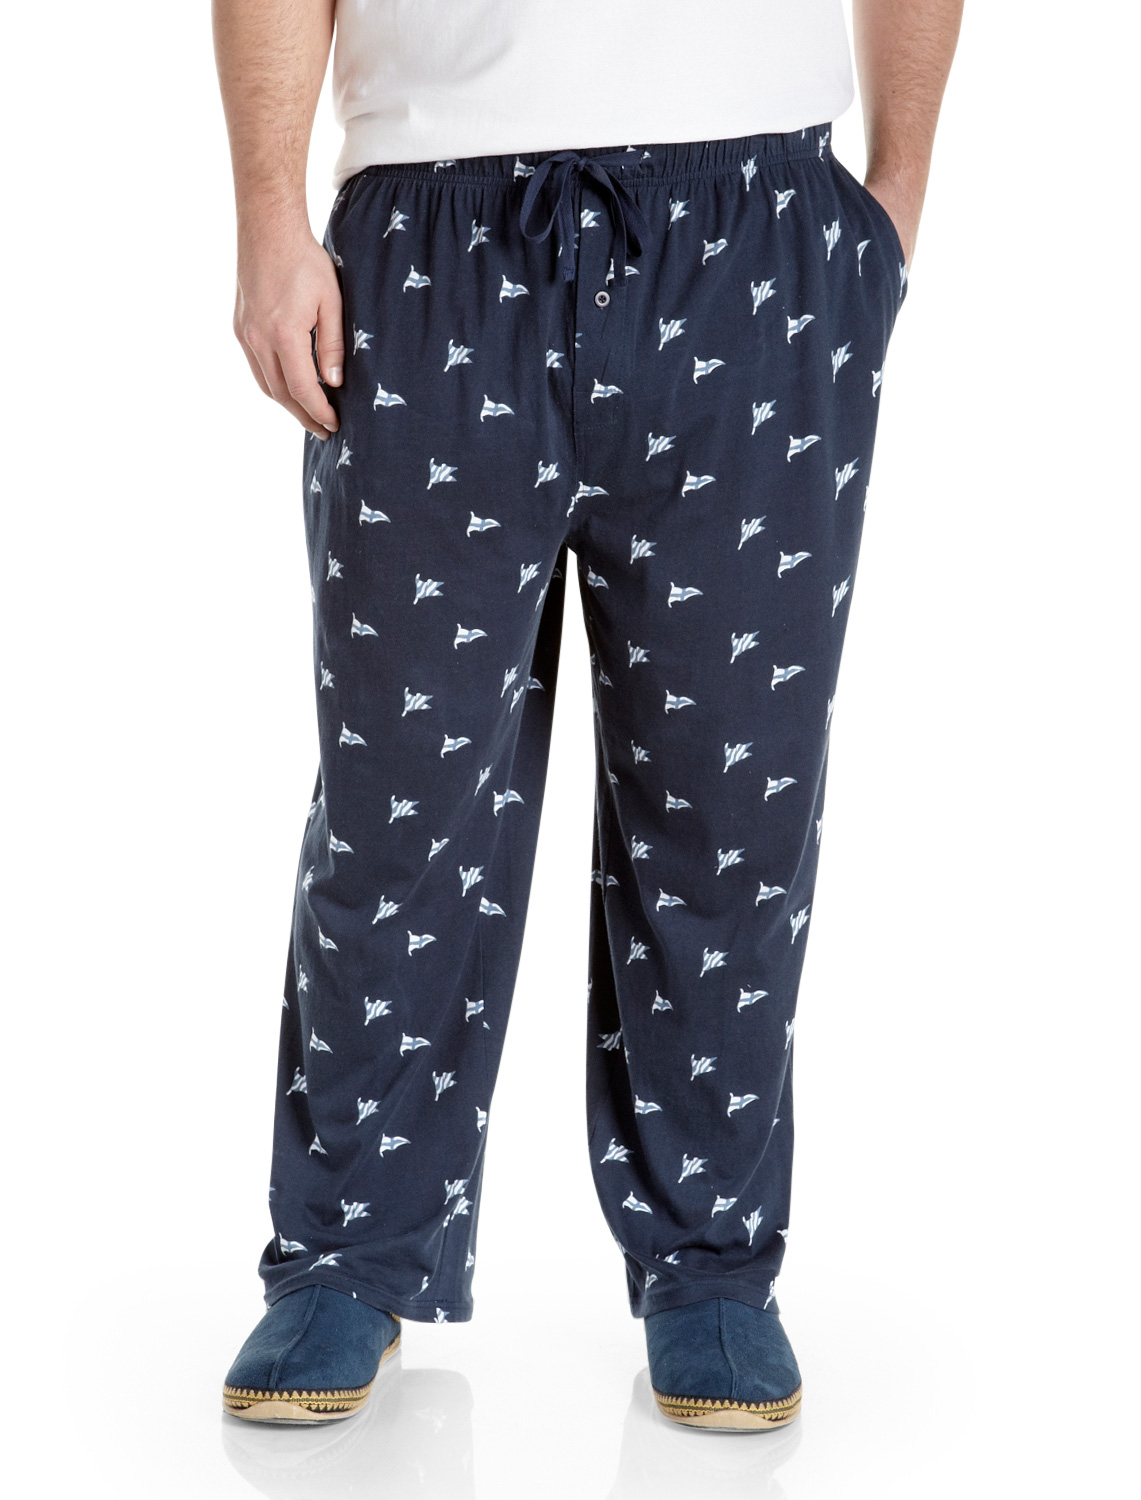 Harbor Bay Flags Jersey Knit Lounge Pants